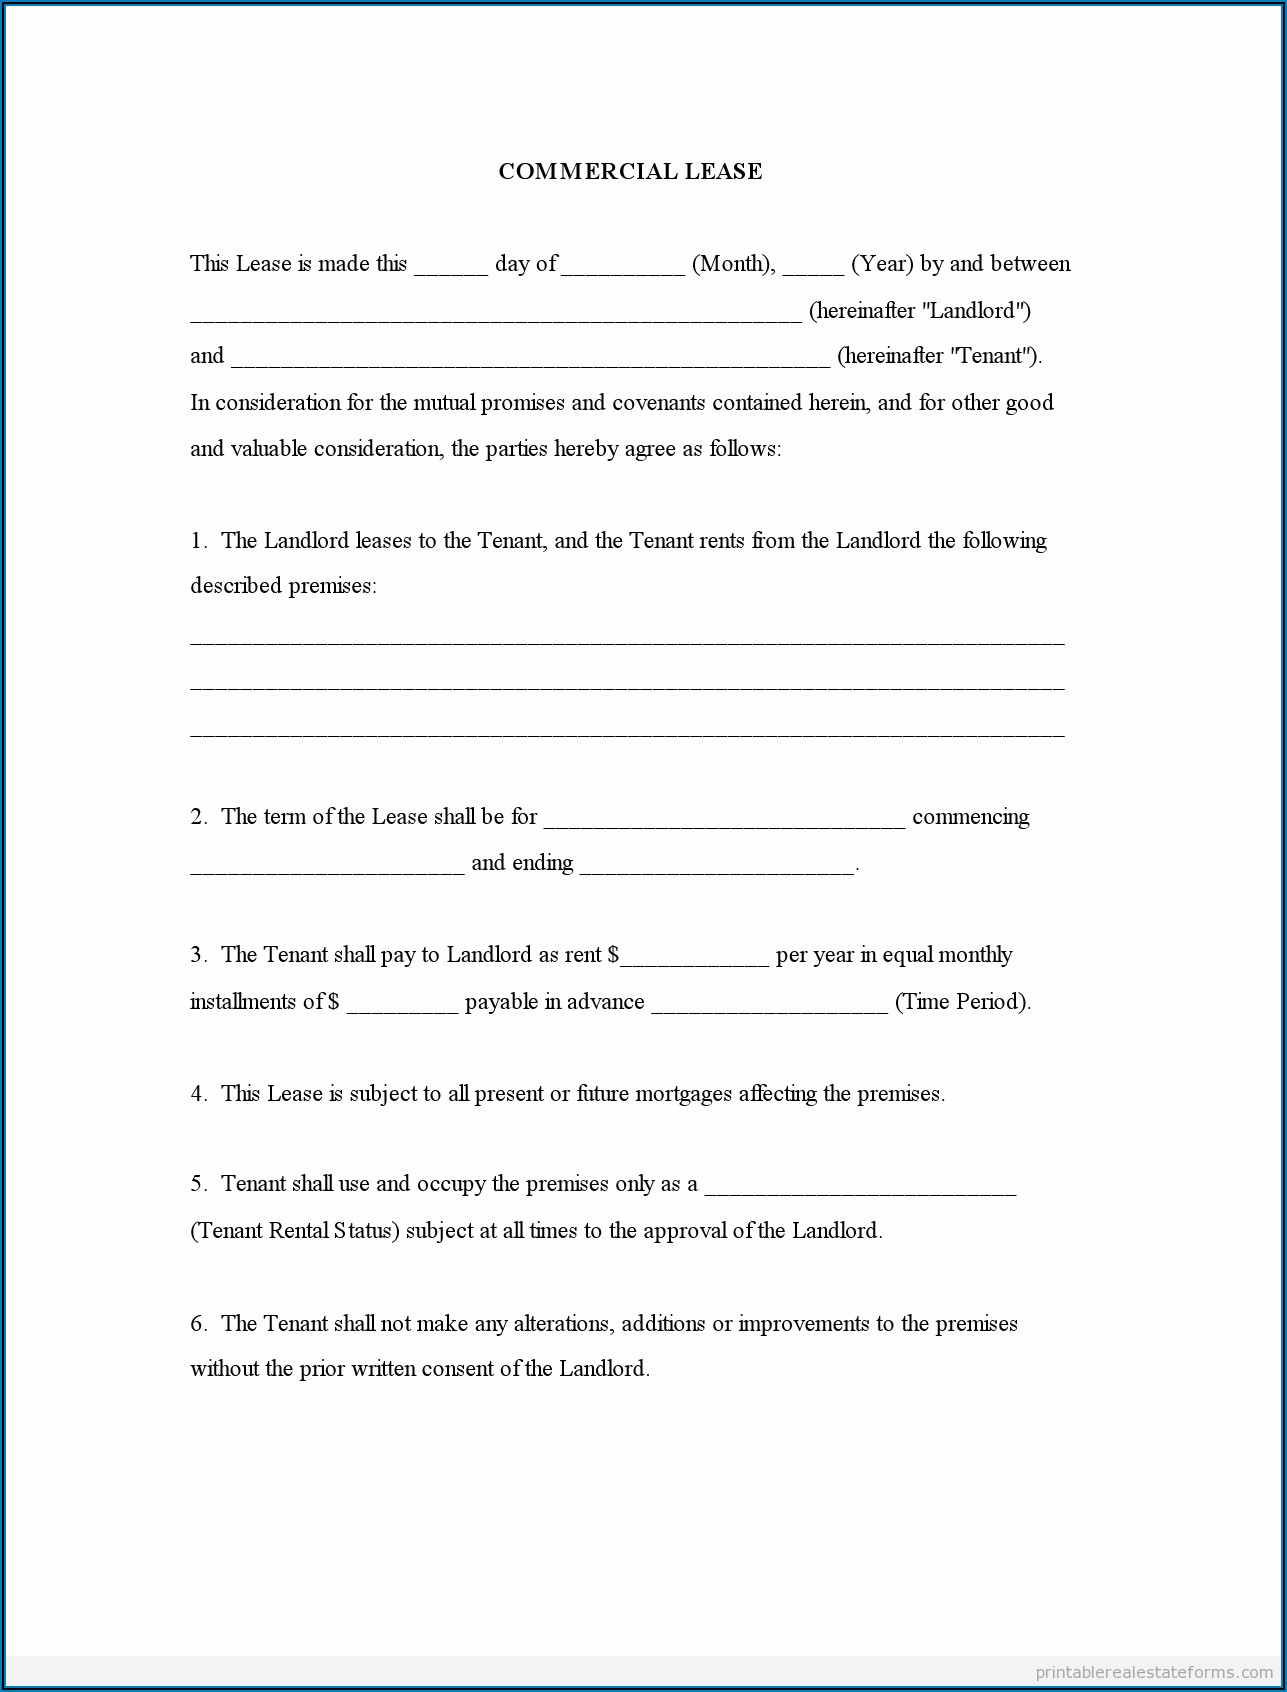 Free Commercial Lease Agreement Forms To Print